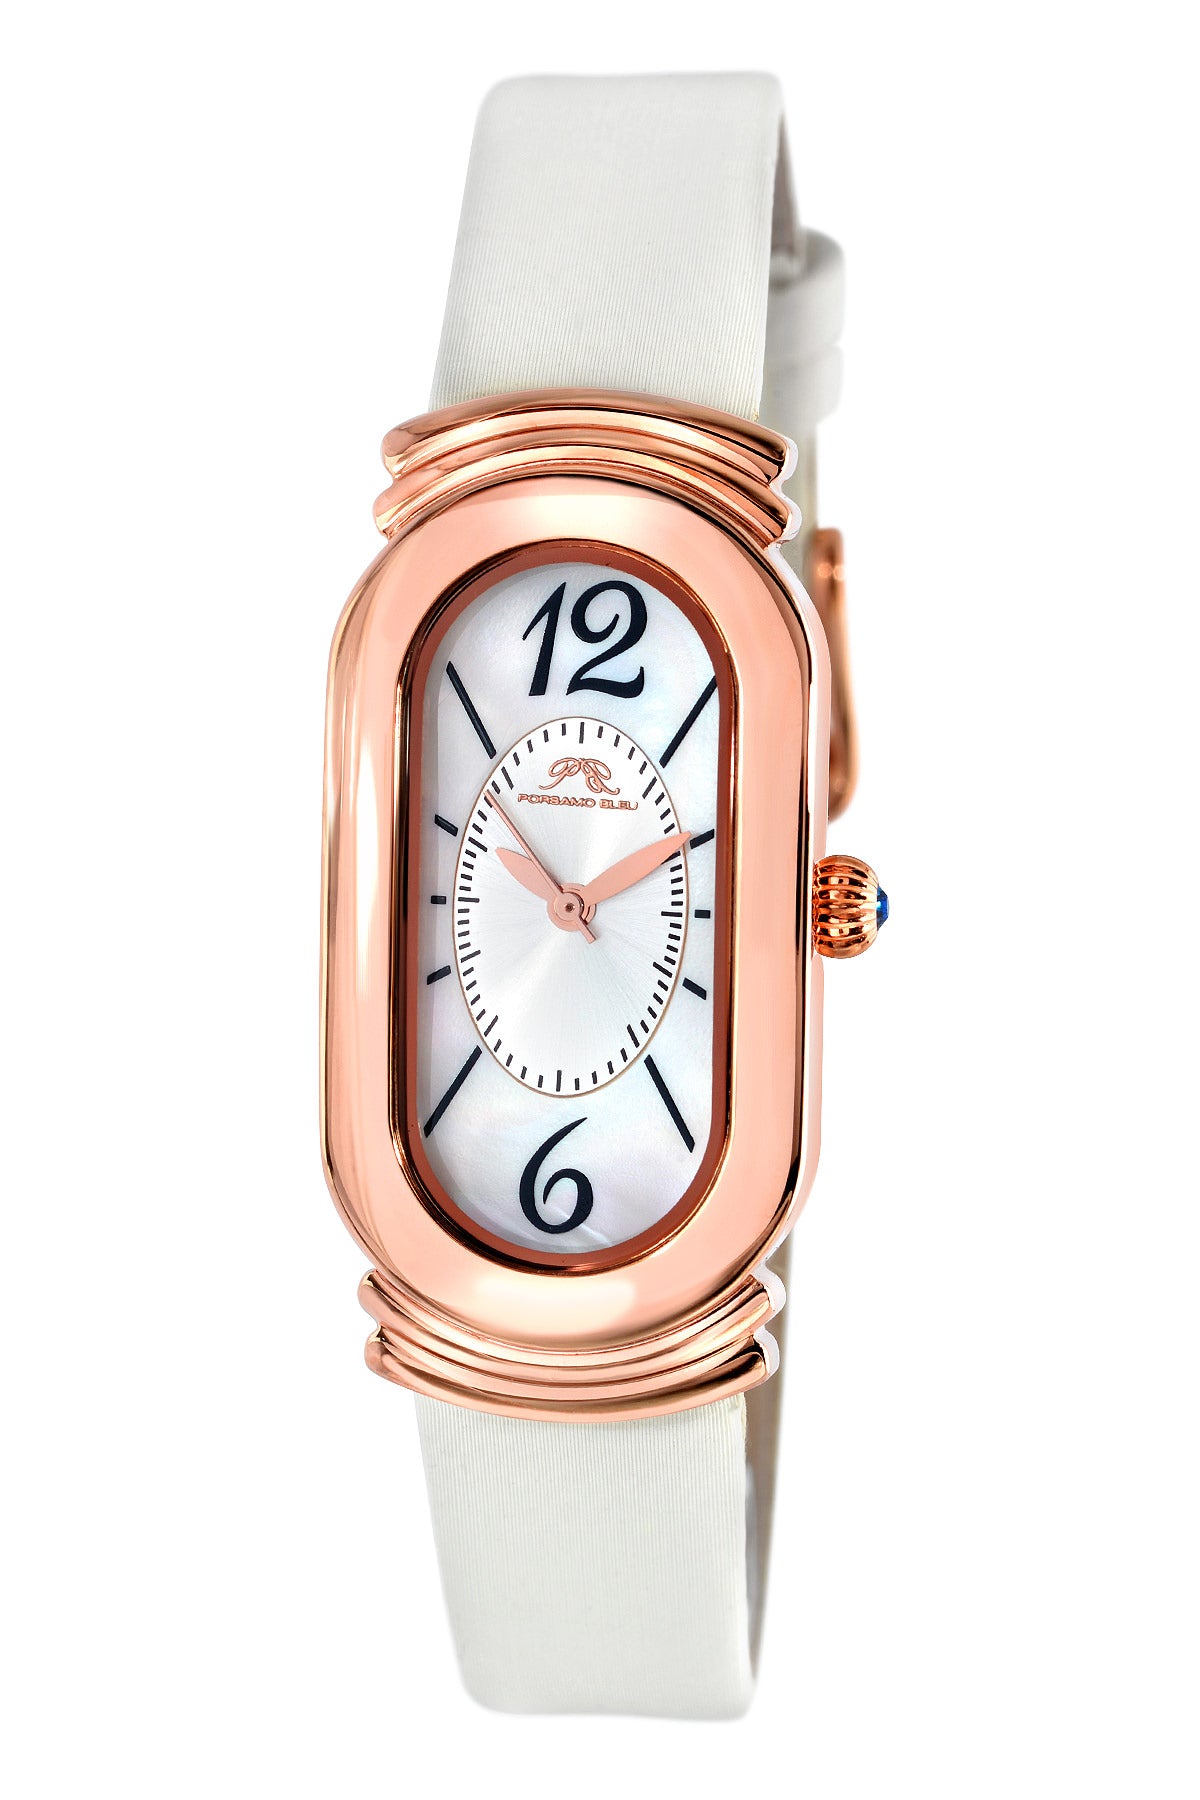 Porsamo Bleu Camille luxury women's silk covered leather watch, rose, white 972ACAL